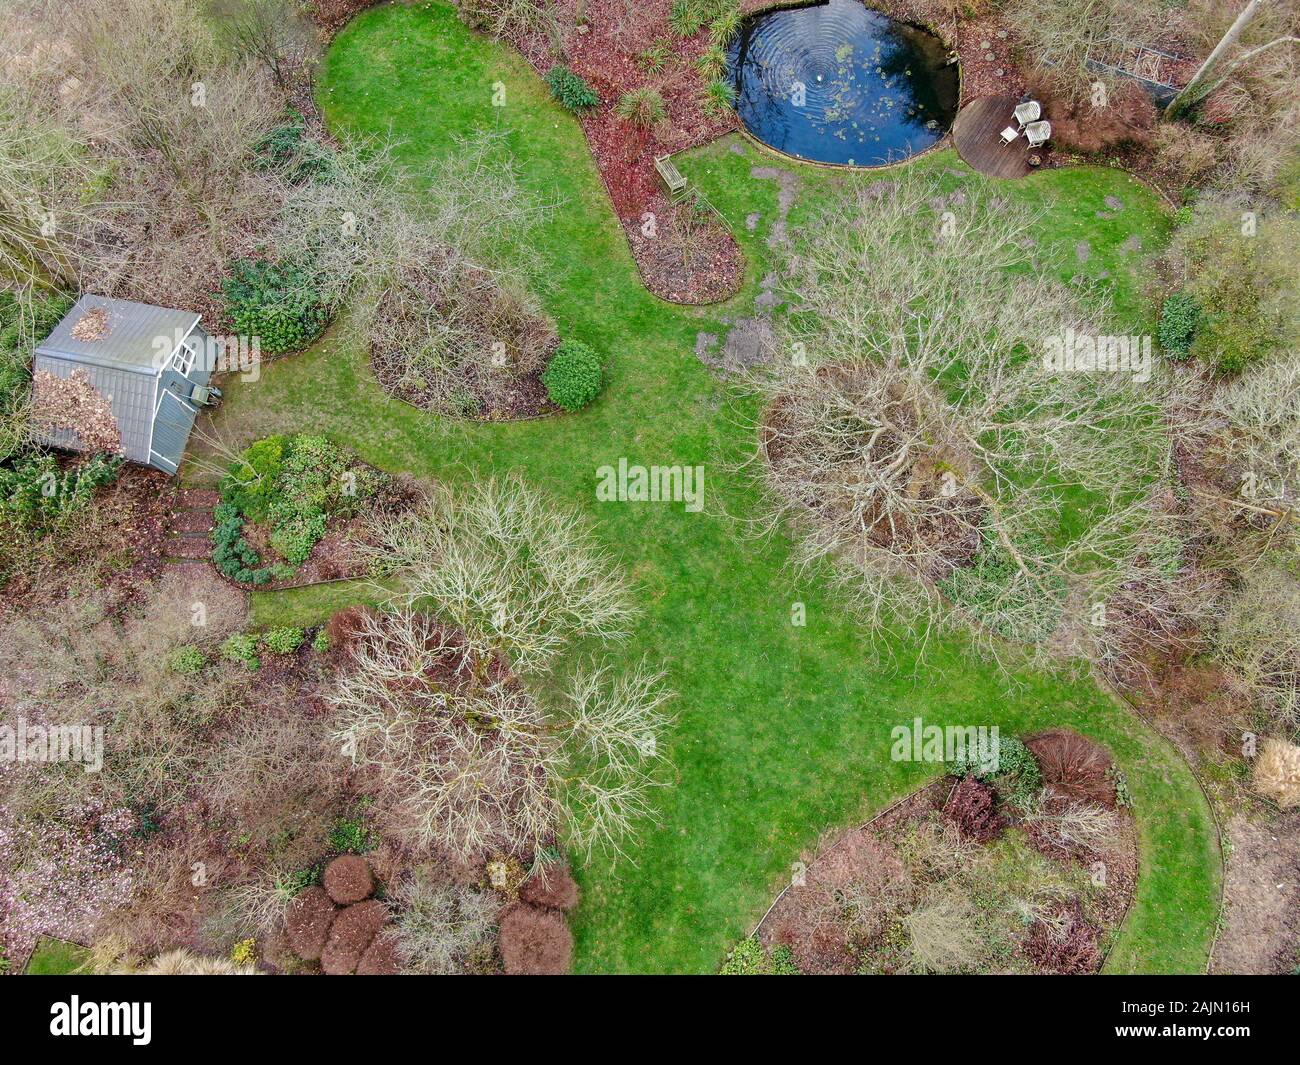 Aerial view of English garden type during winter season. Garden with a large green grass, little pound of water and different type of plants, trees and small garden wood house. Stock Photo